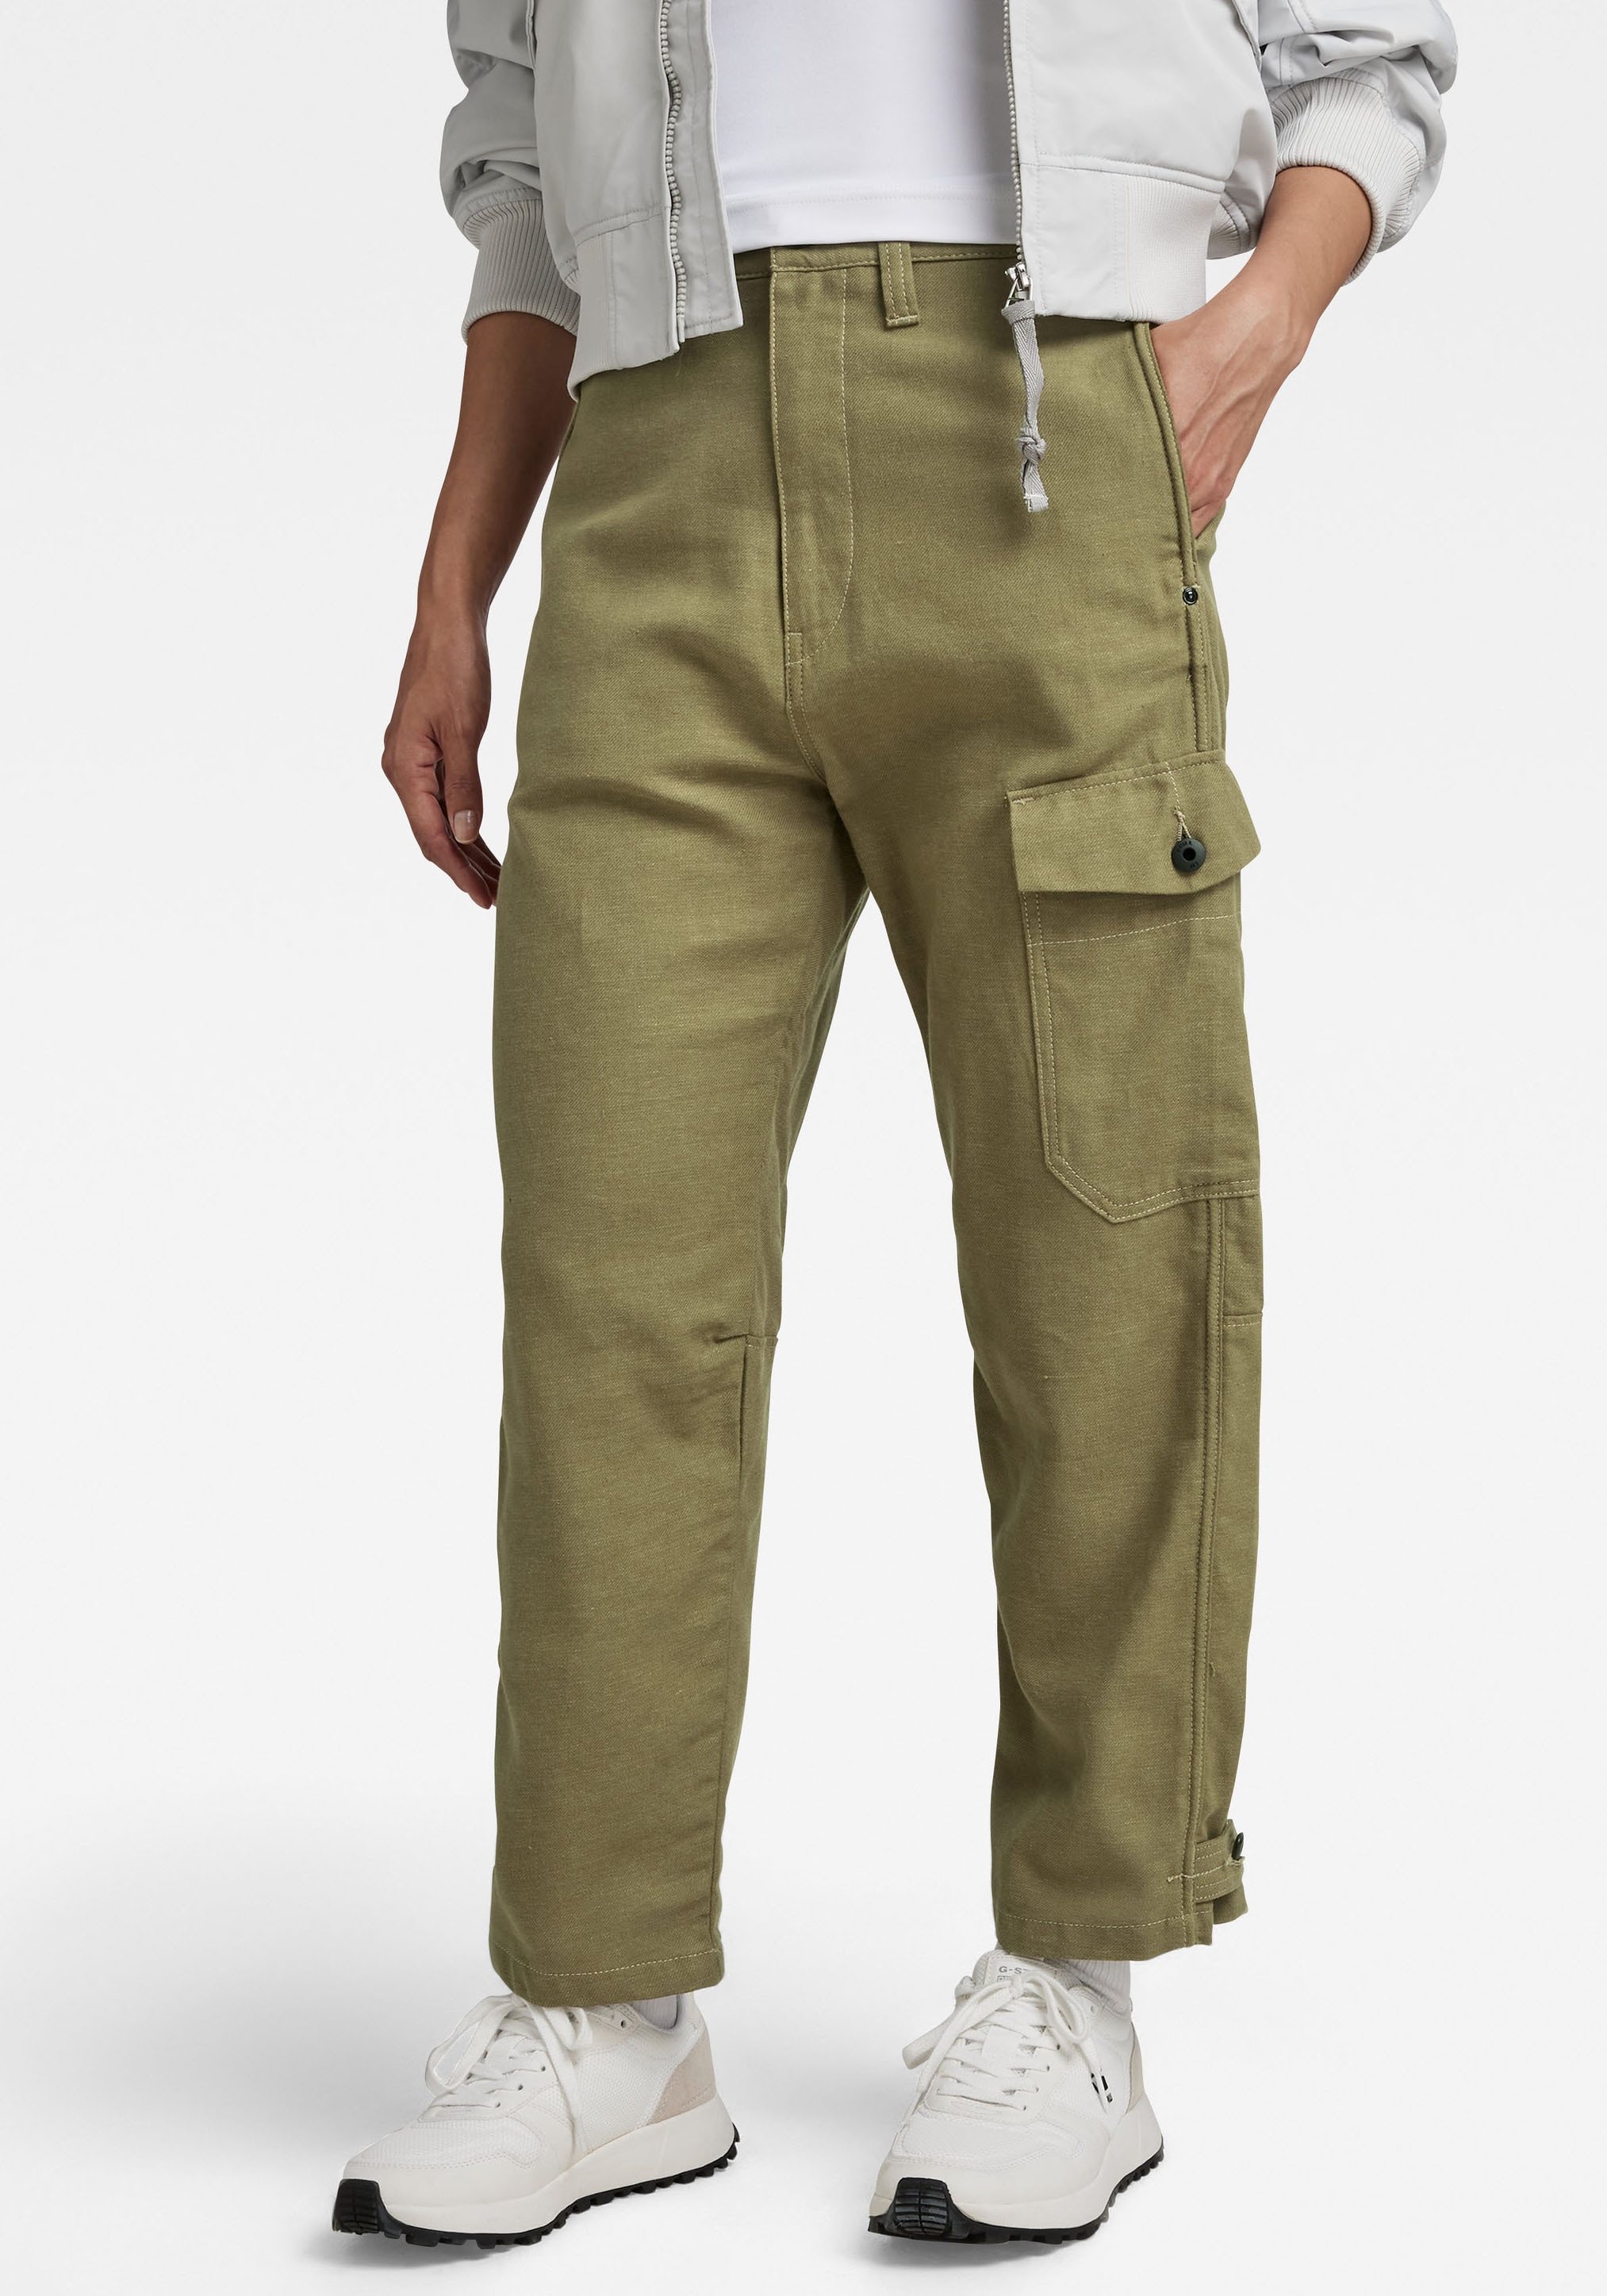 G-Star RAW Cargohose »Cargo bei Relaxed« ♕